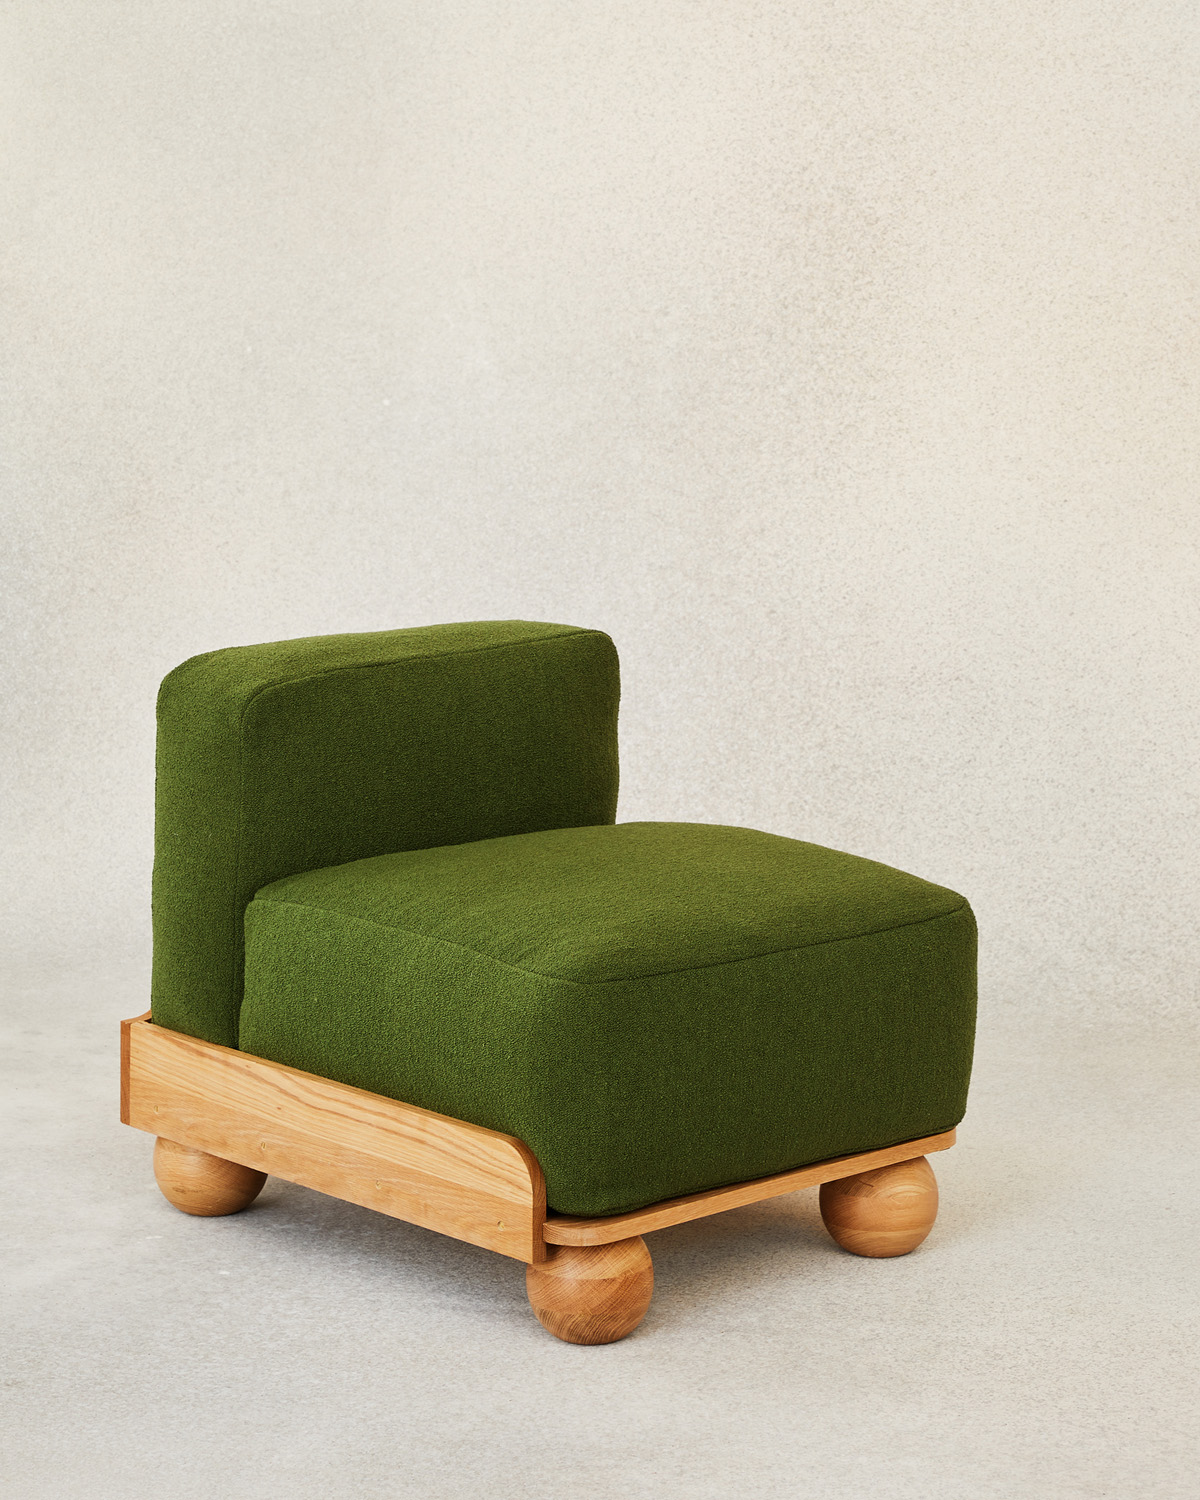 Green chair by Fred Rigby - artisinal furniture maker in UK